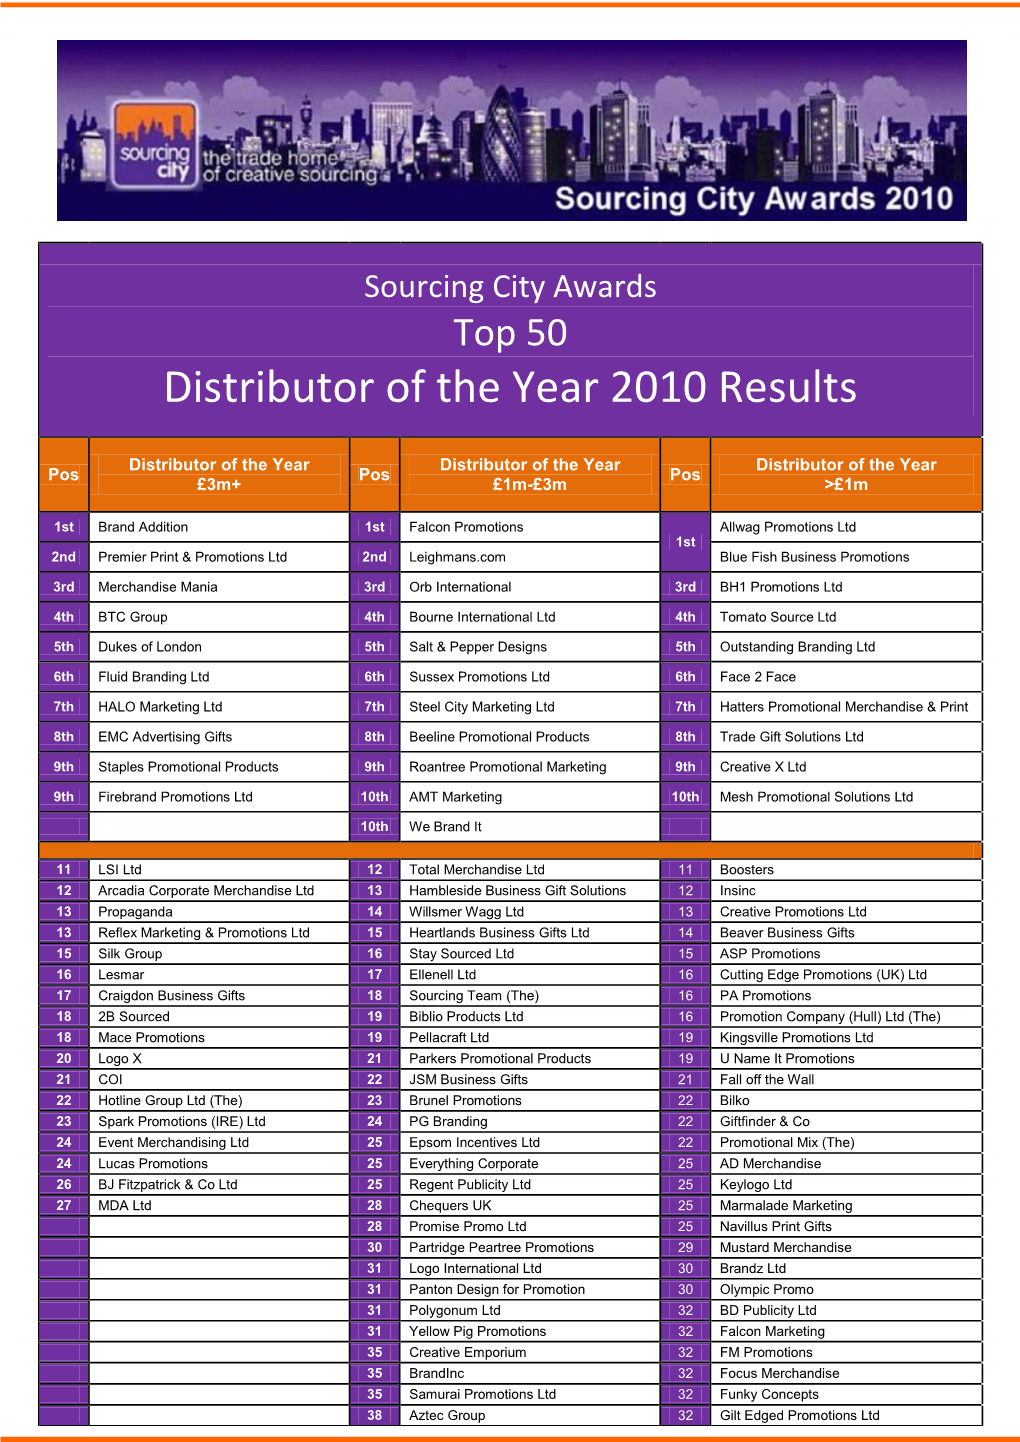 Distributor of the Year 2010 Results